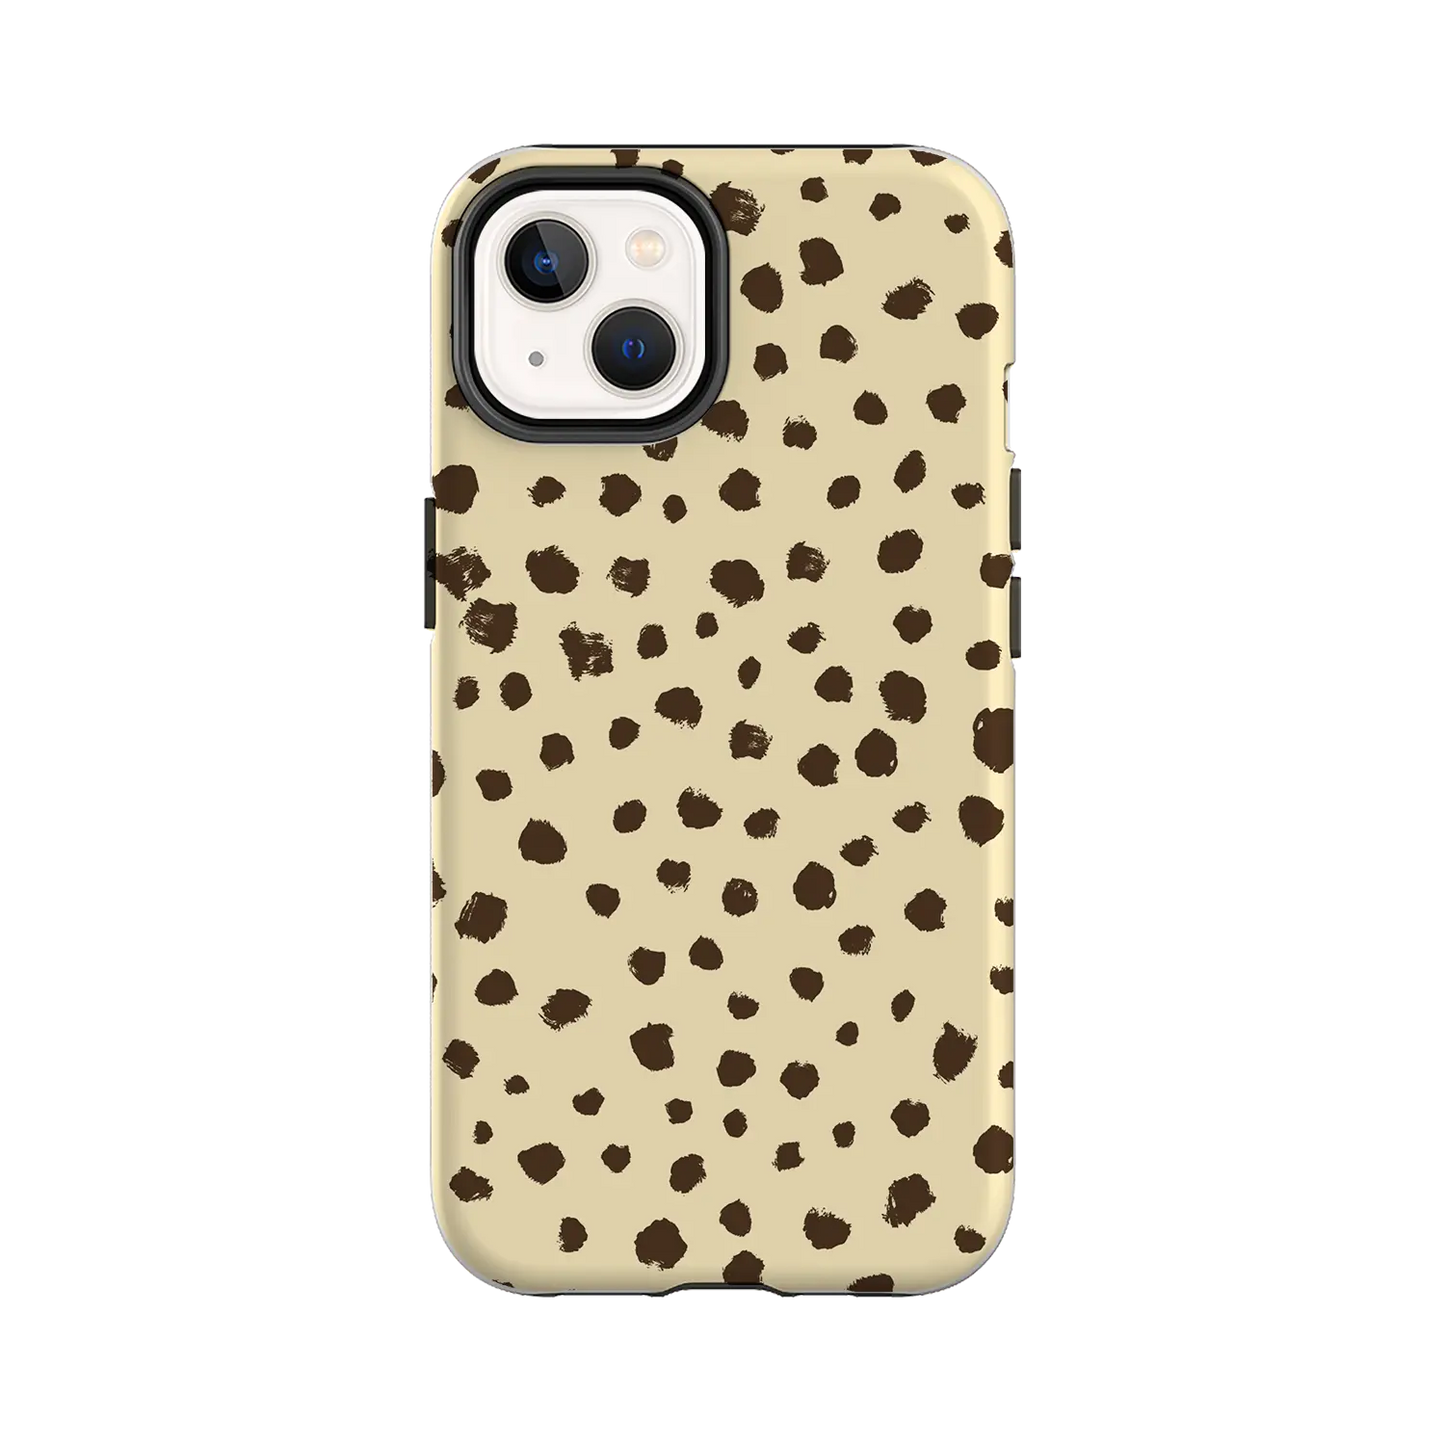 Grunge Dots - Personalised iPhone Case